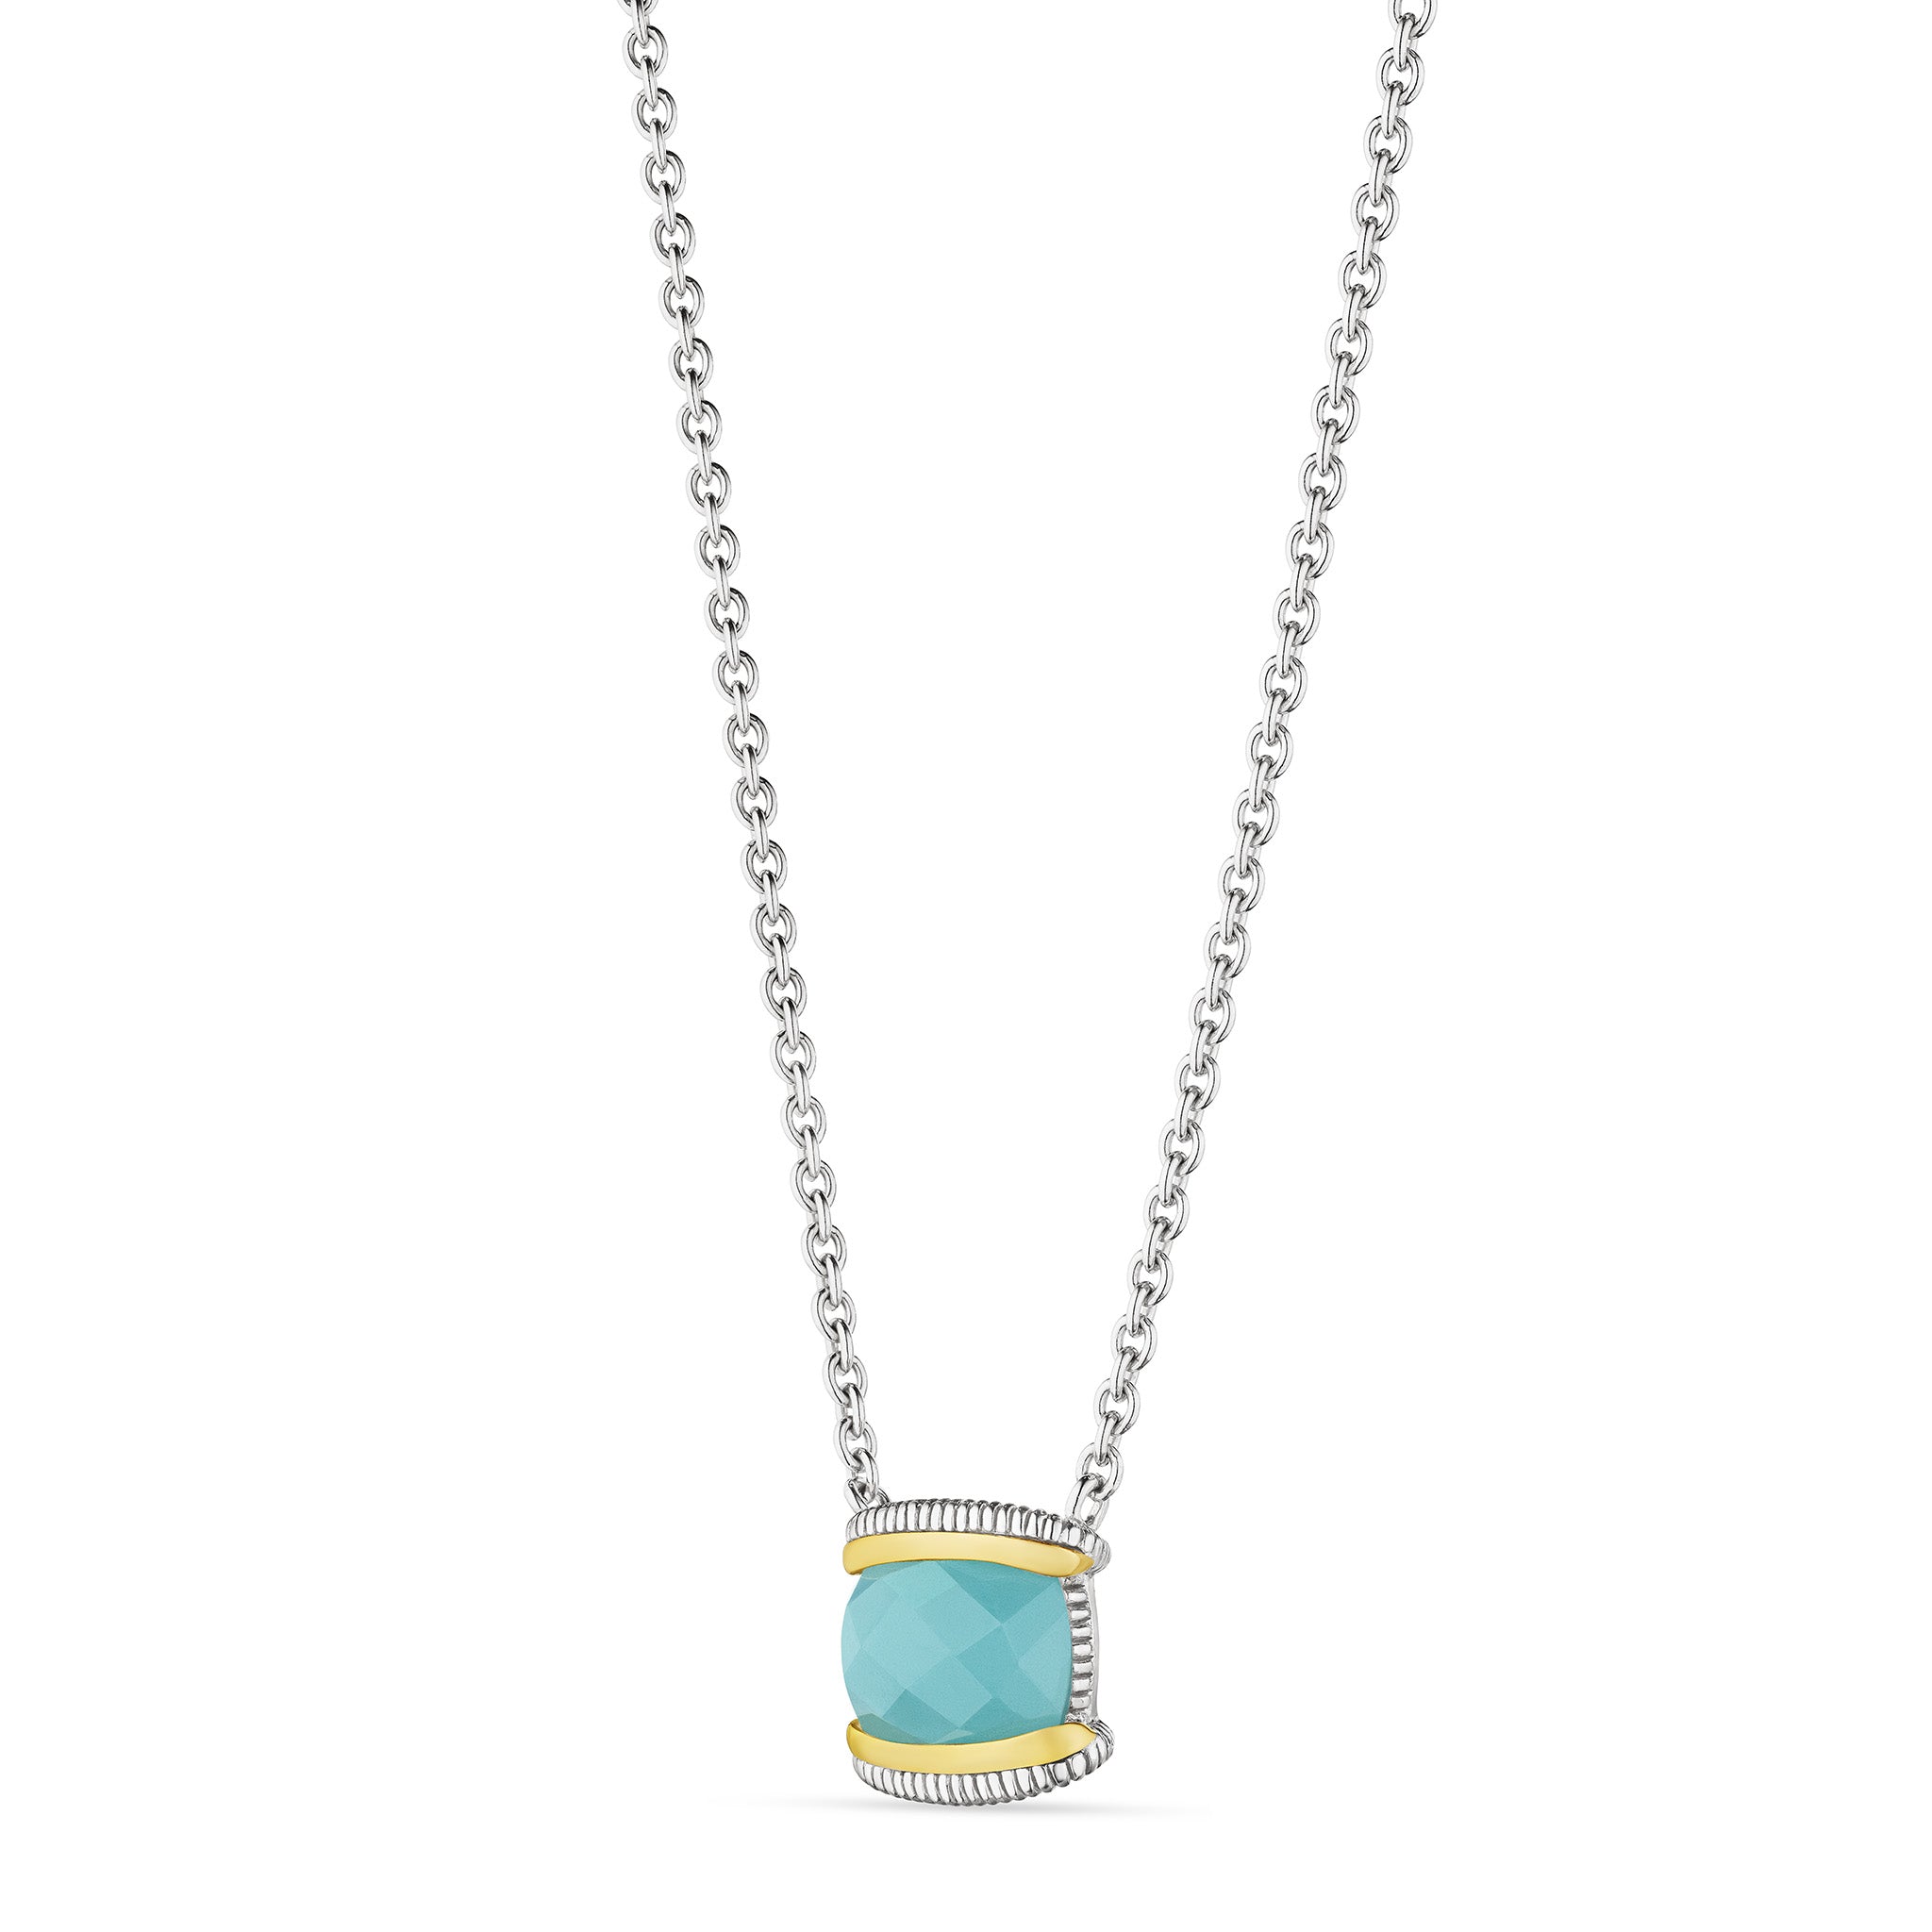 Eternity Necklace With Amazonite And 18K Gold